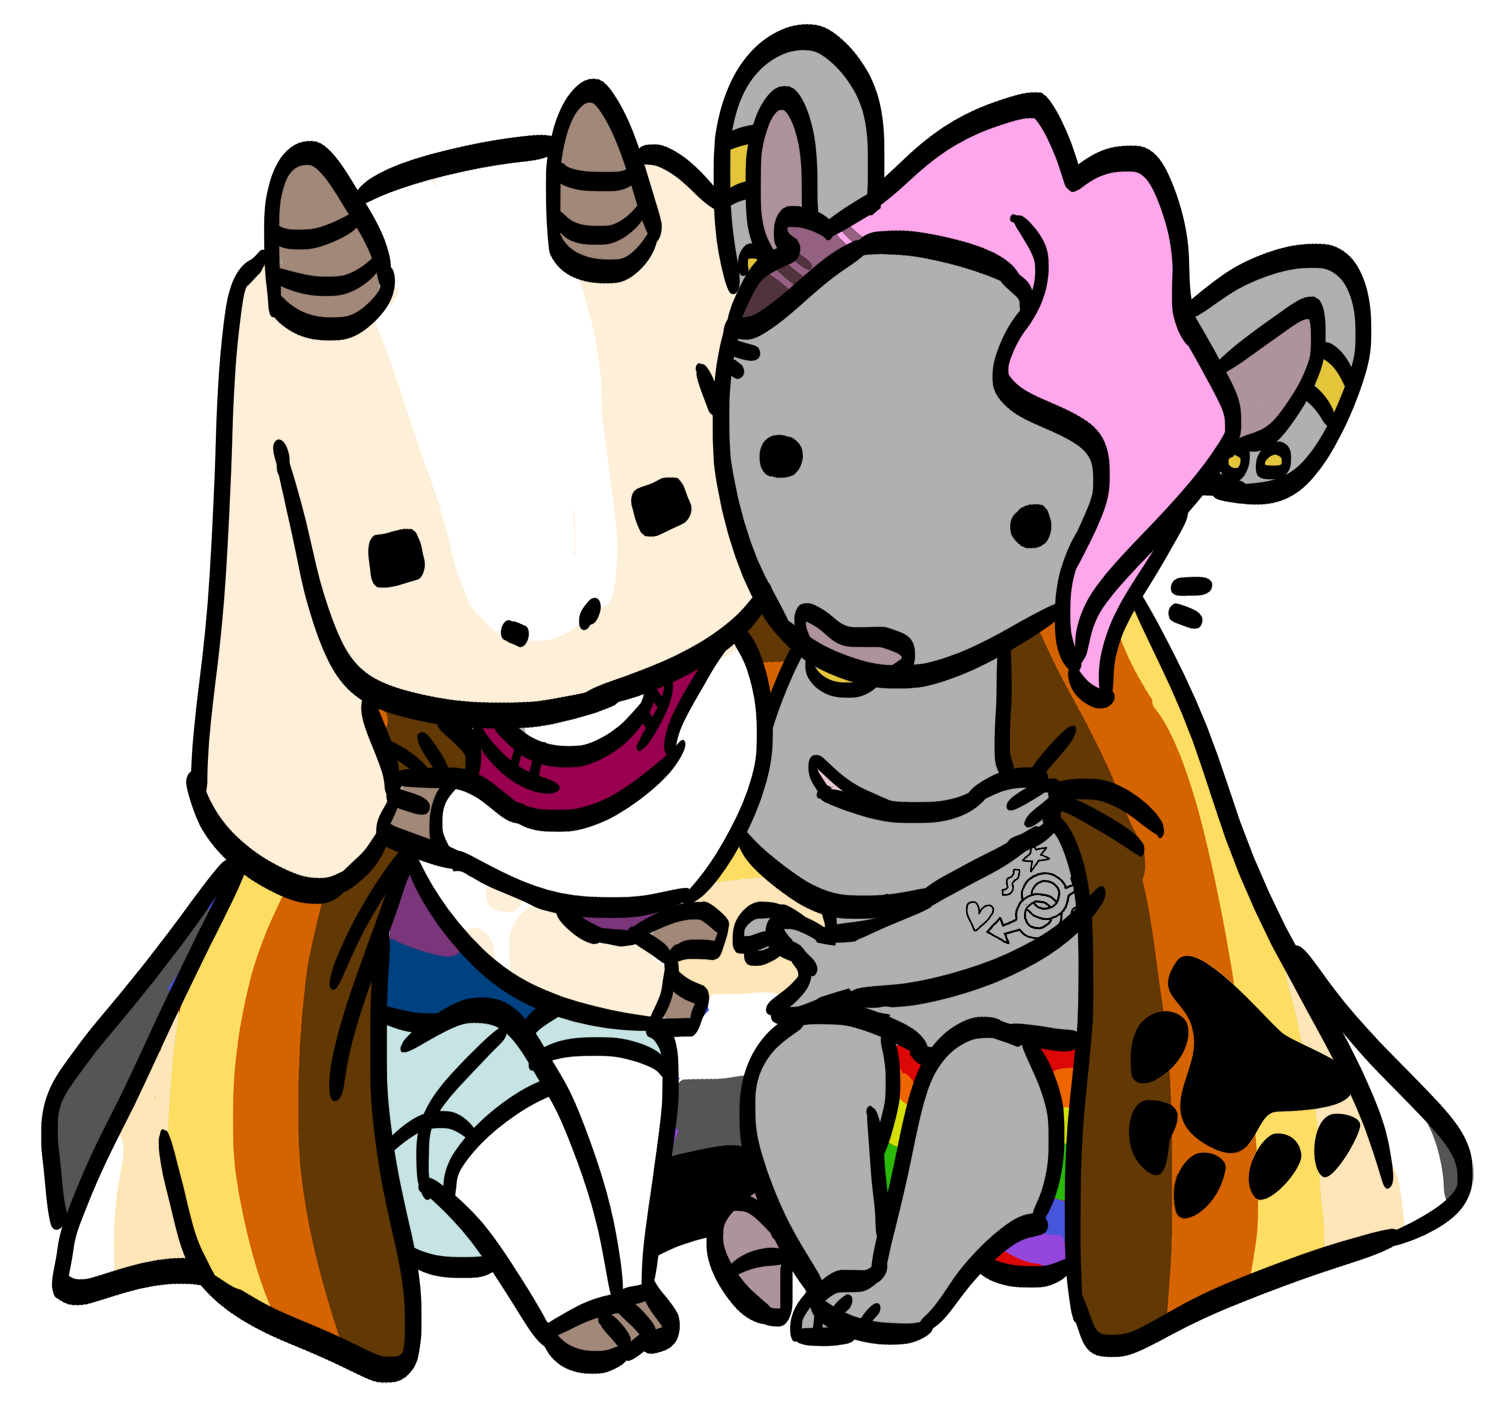 A chibi anthro goat wearing a bi flag shirt and a chibi anthro rat wearing rainbow shorts make a heart shape together with each others hands. They are draped in a Bear pride flag together.